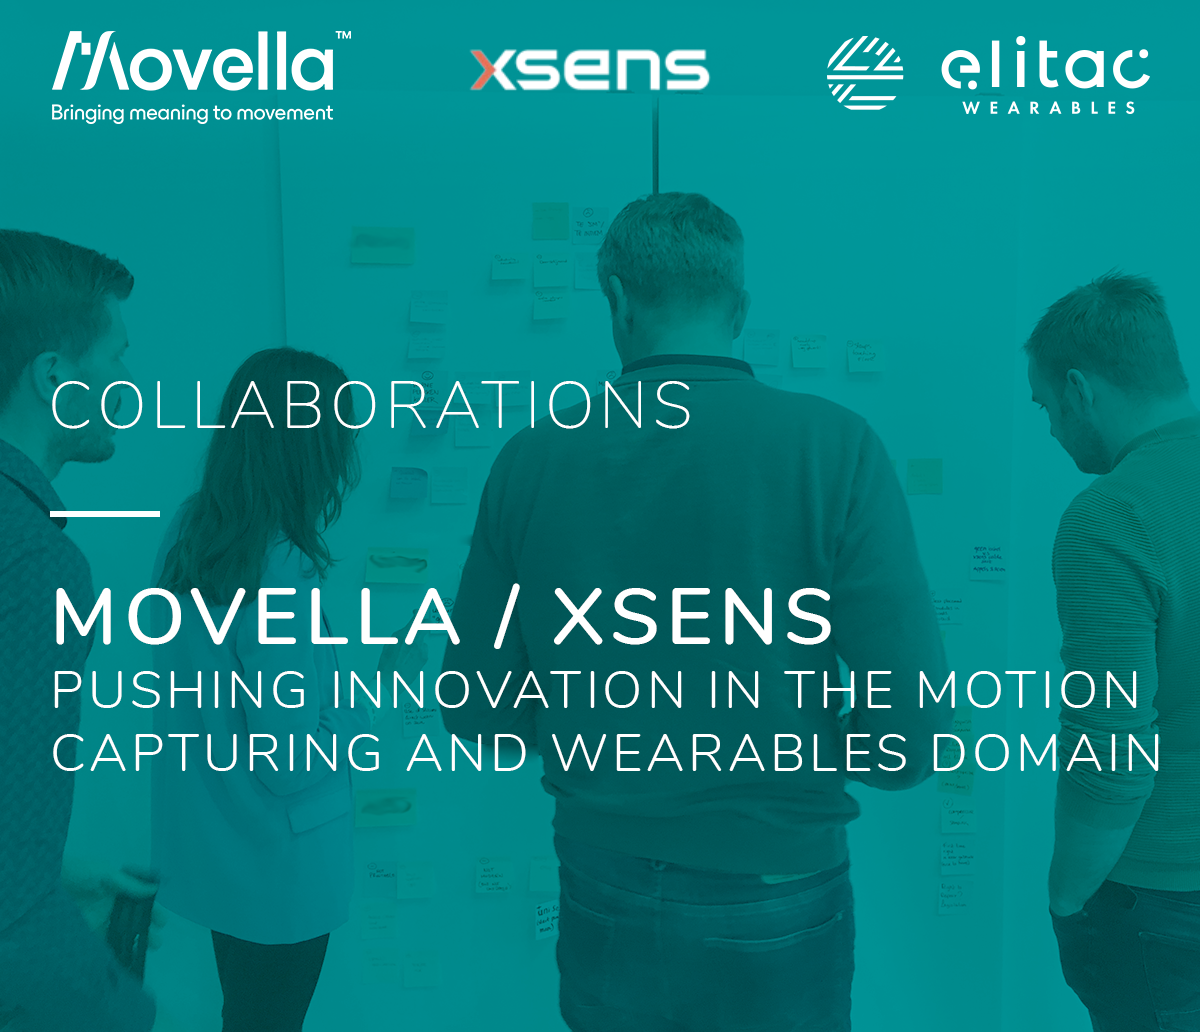 Collaboration – Xsens (Movella) and Elitac Wearables pushing innovation in the motion capturing and wearables domain